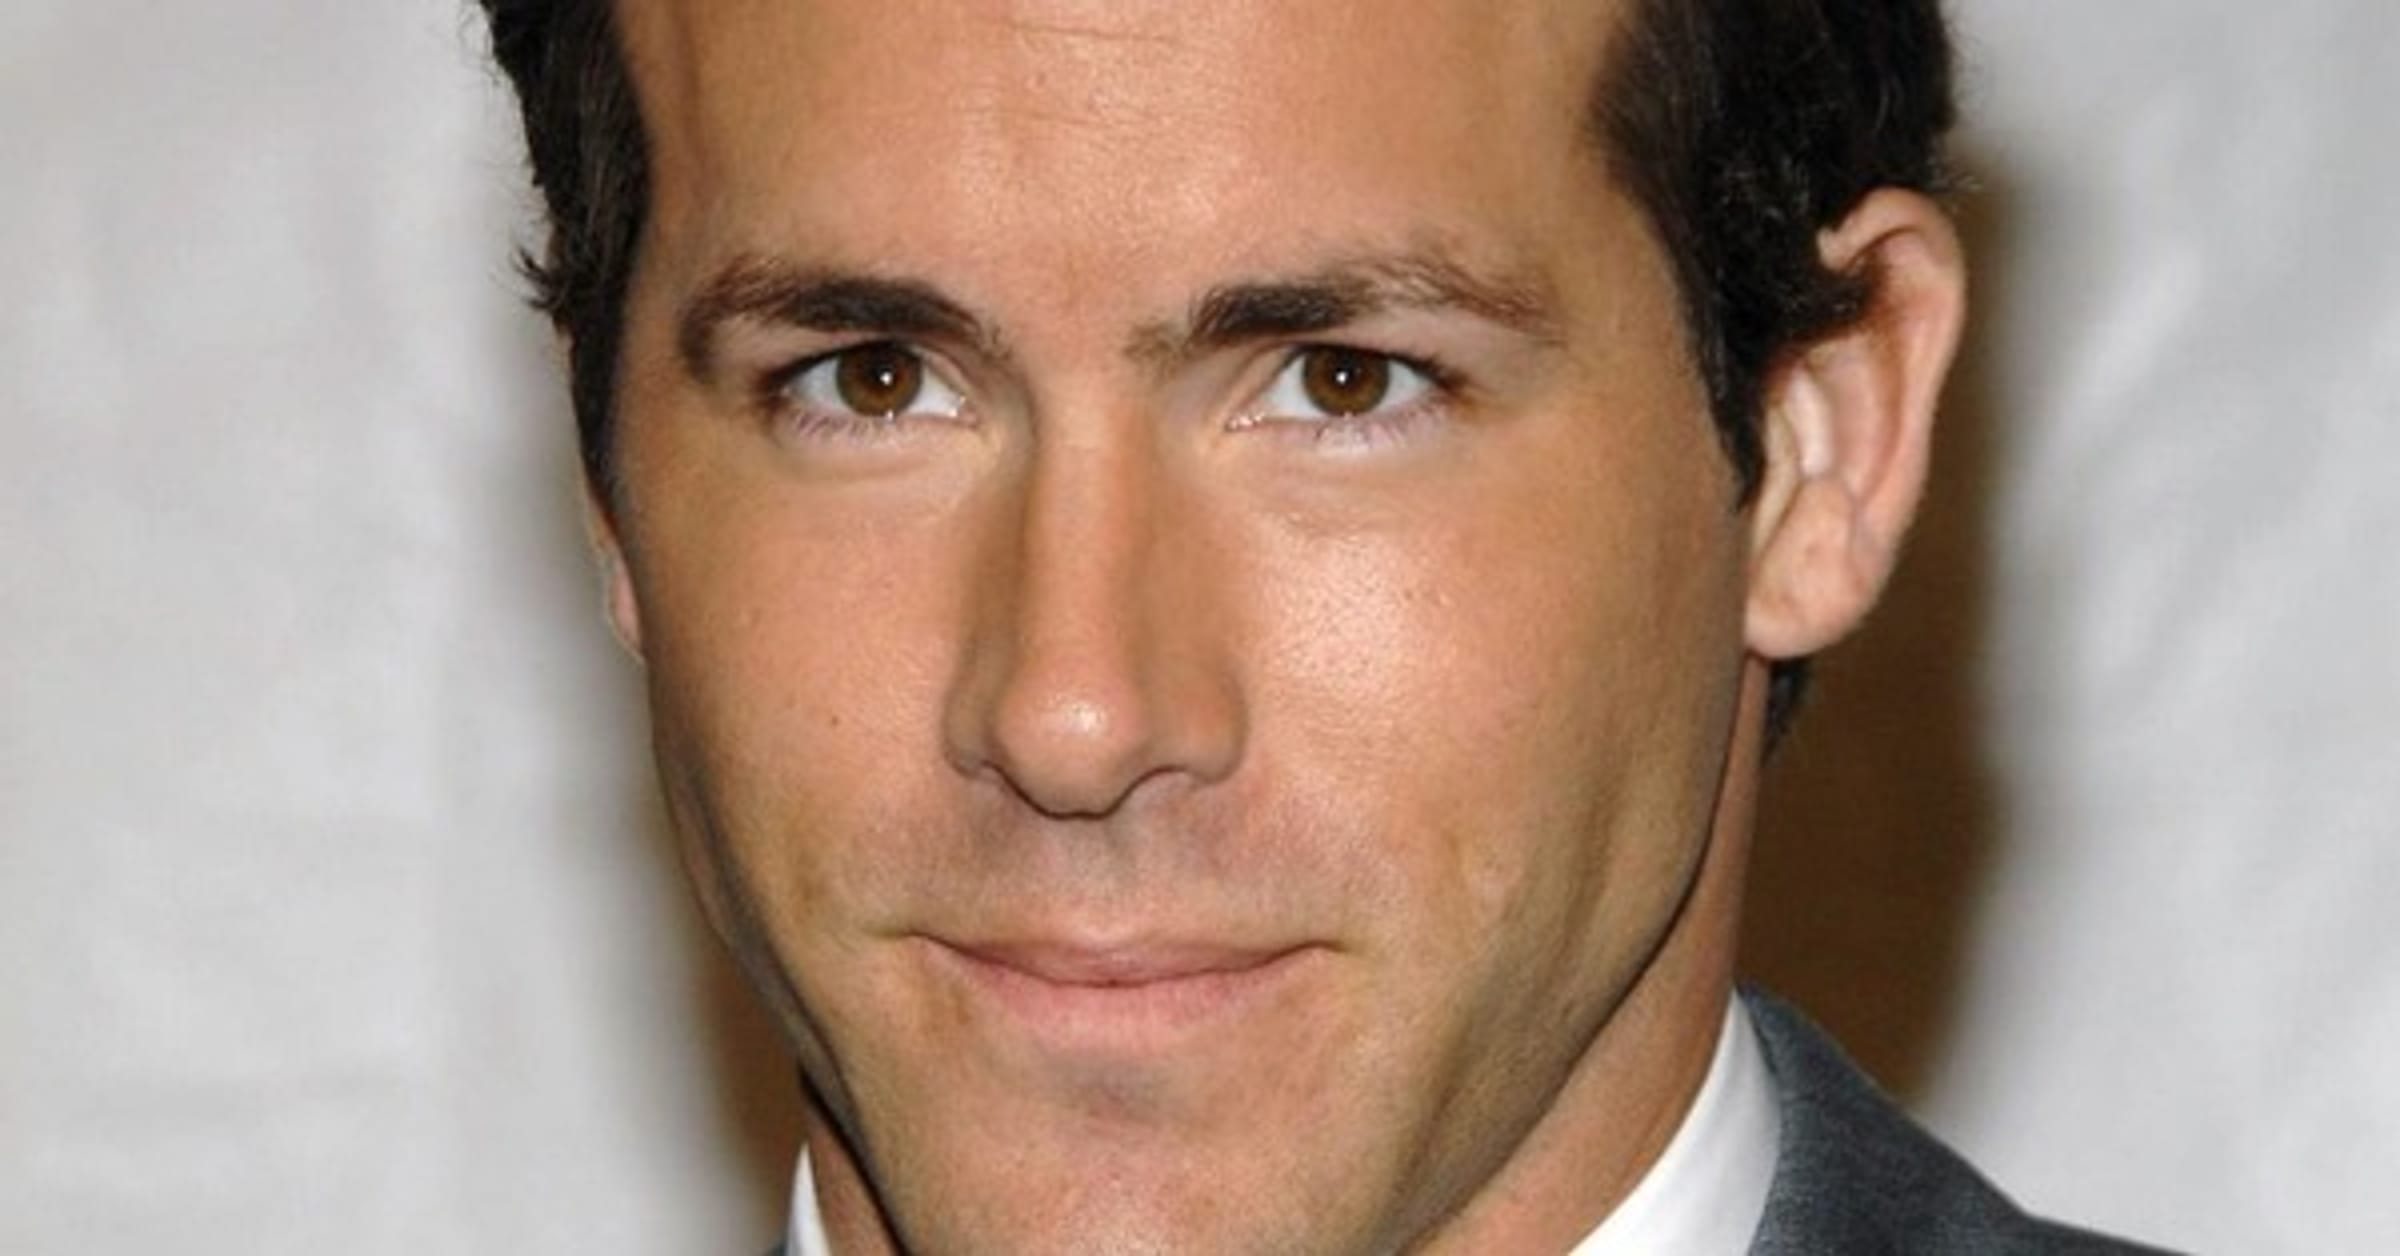 Cool Facts You Didn't Know About Actor Ryan Reynolds